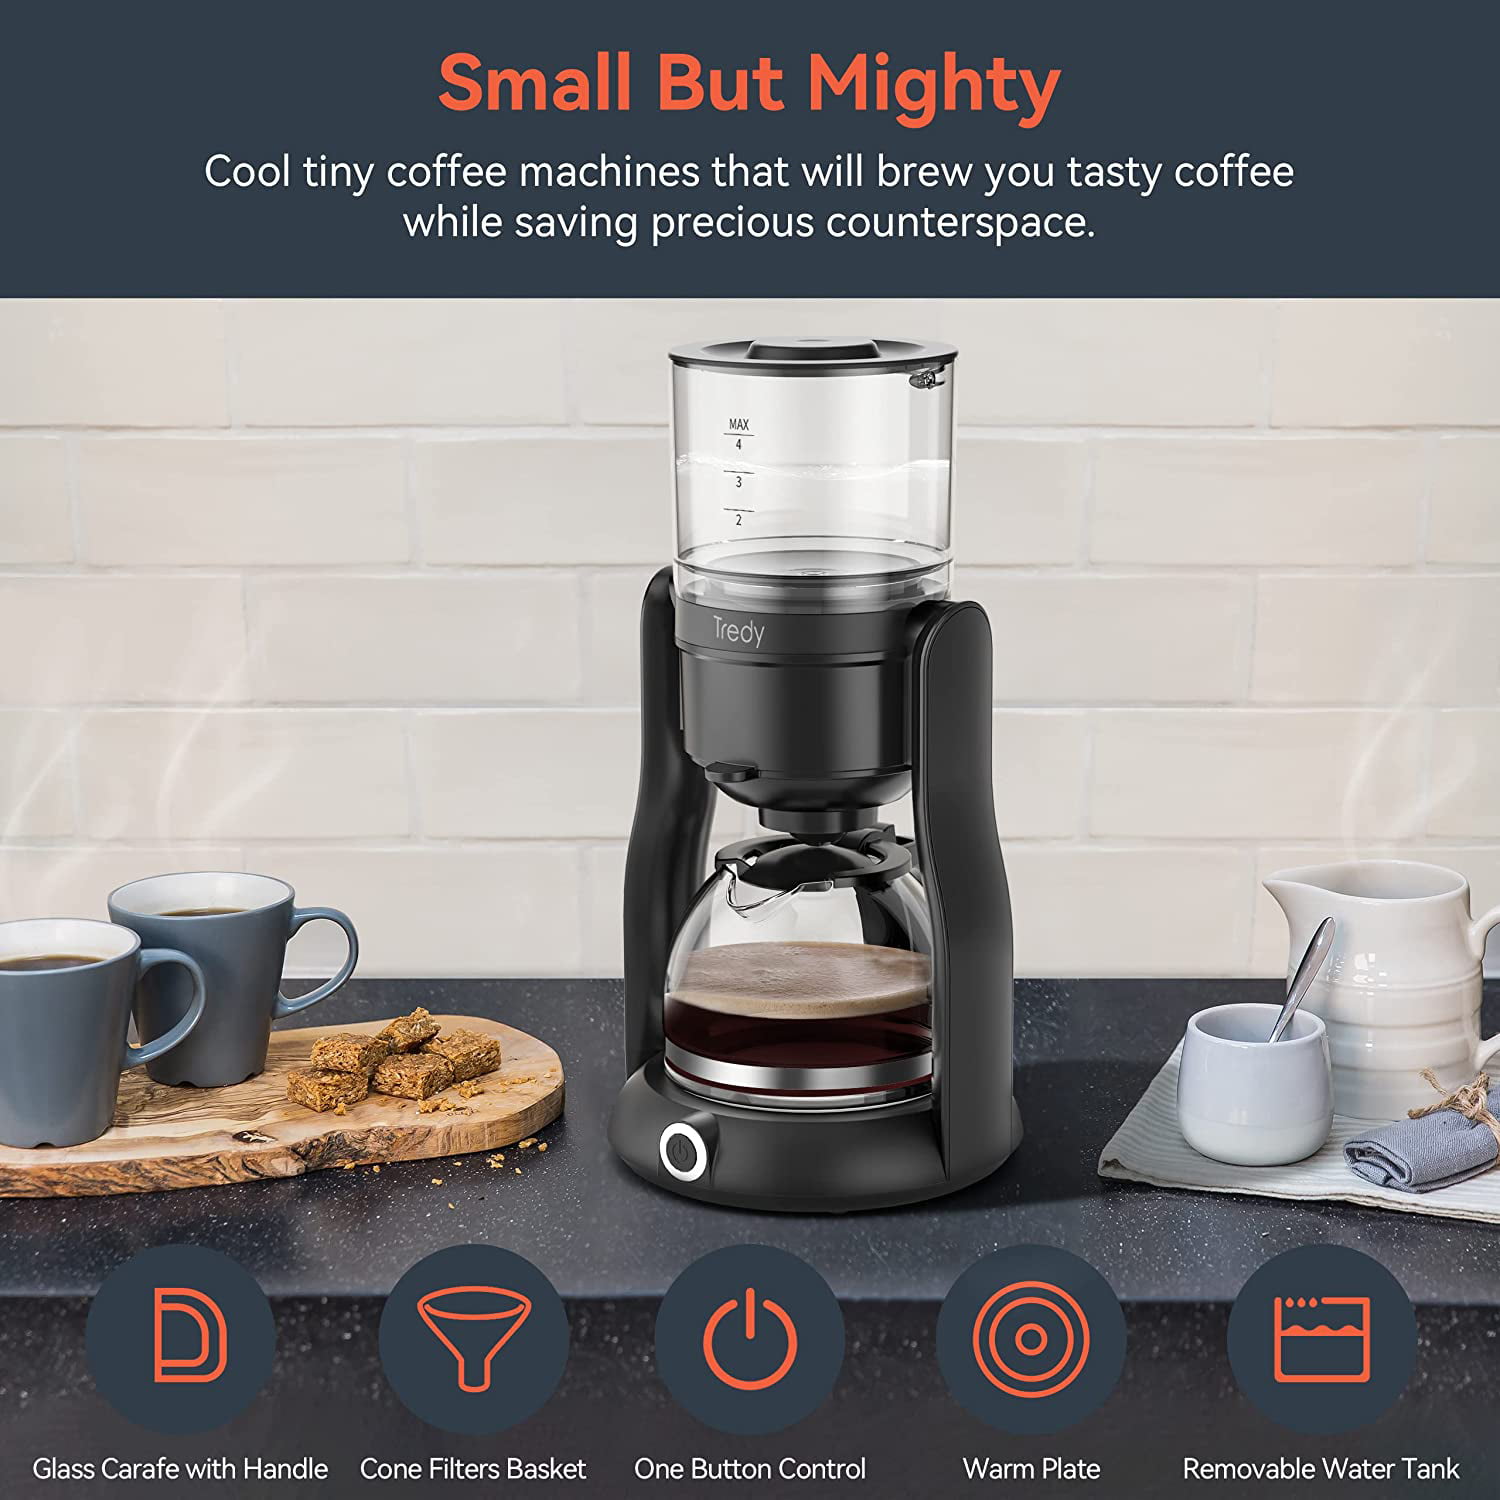 Replying to @Thickalicious Under $13 for a coffee maker?! That